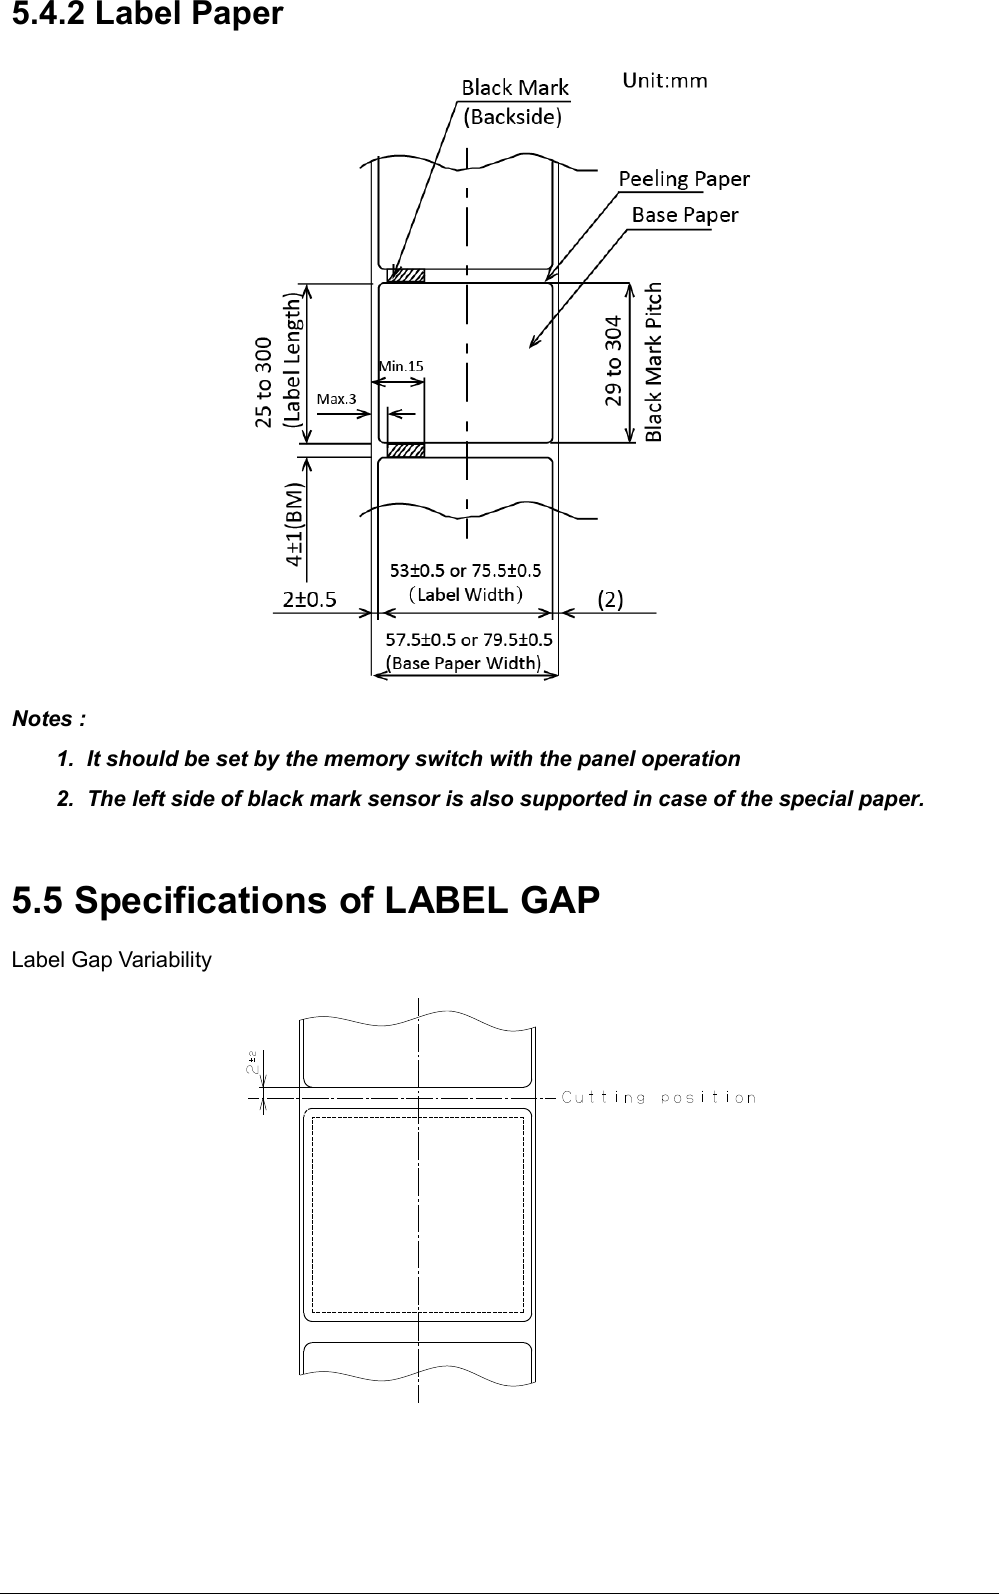   5.4.2 Label Paper  Notes :  1.  It should be set by the memory switch with the panel operation 2.  The left side of black mark sensor is also supported in case of the special paper.  5.5 Specifications of LABEL GAP  Label Gap Variability     